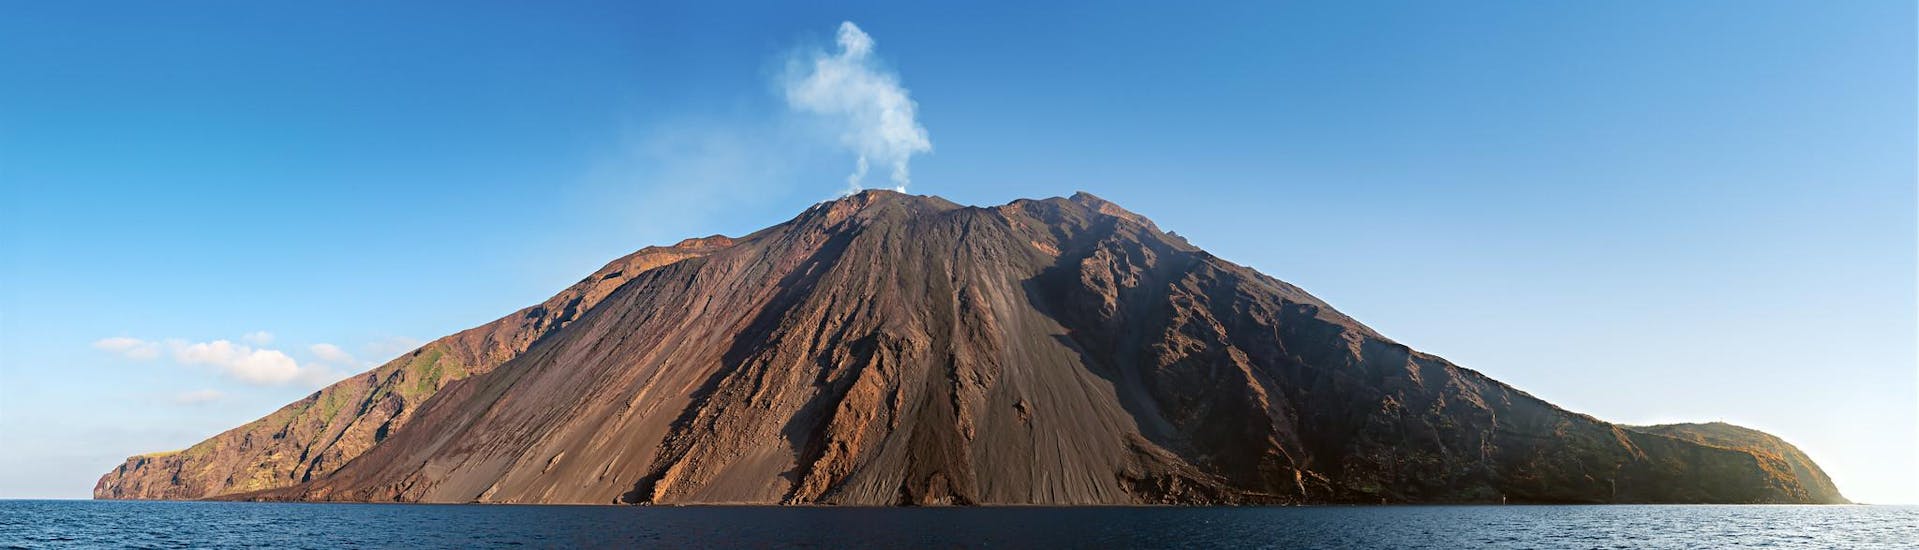 Take a Volcano tour or enjoy hiking to the top of a volcano.